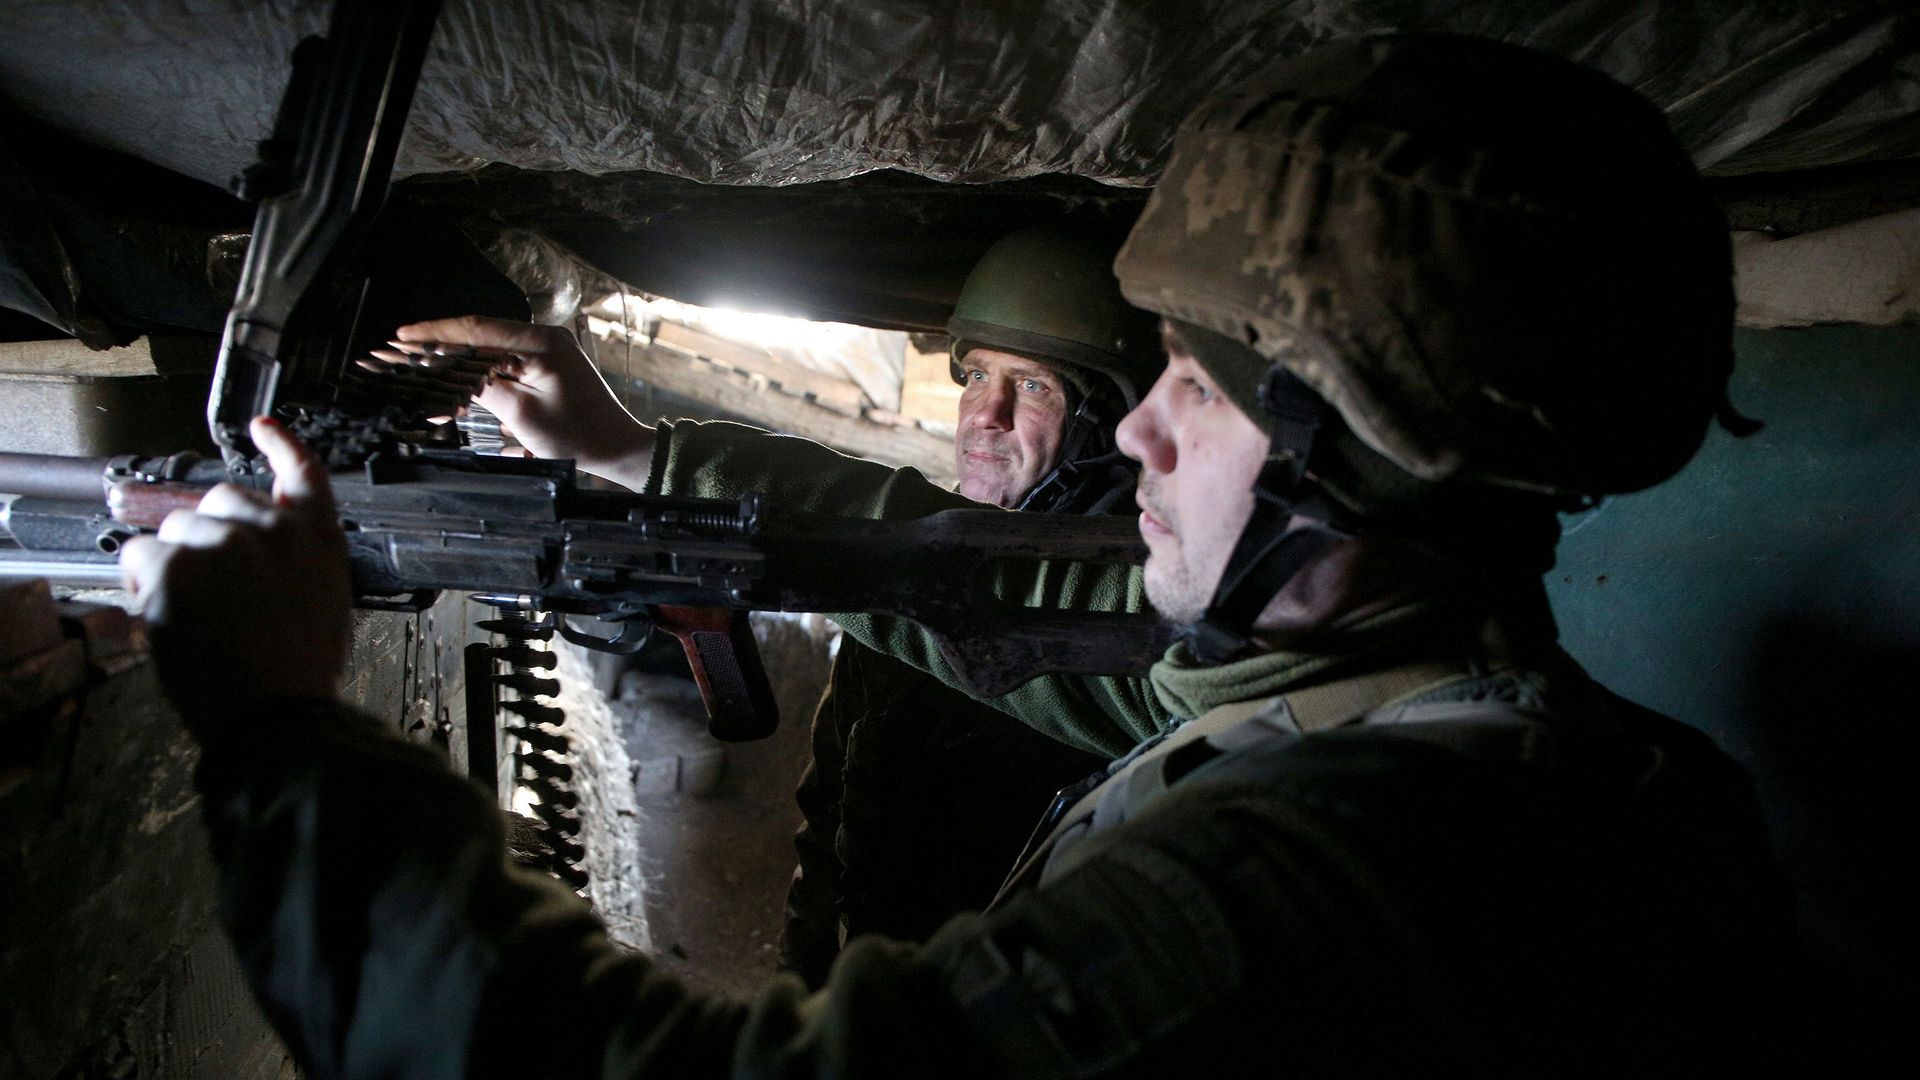 Ukrainian soldiers loading a machine gun in a trench in the Donetsk region on February 19.